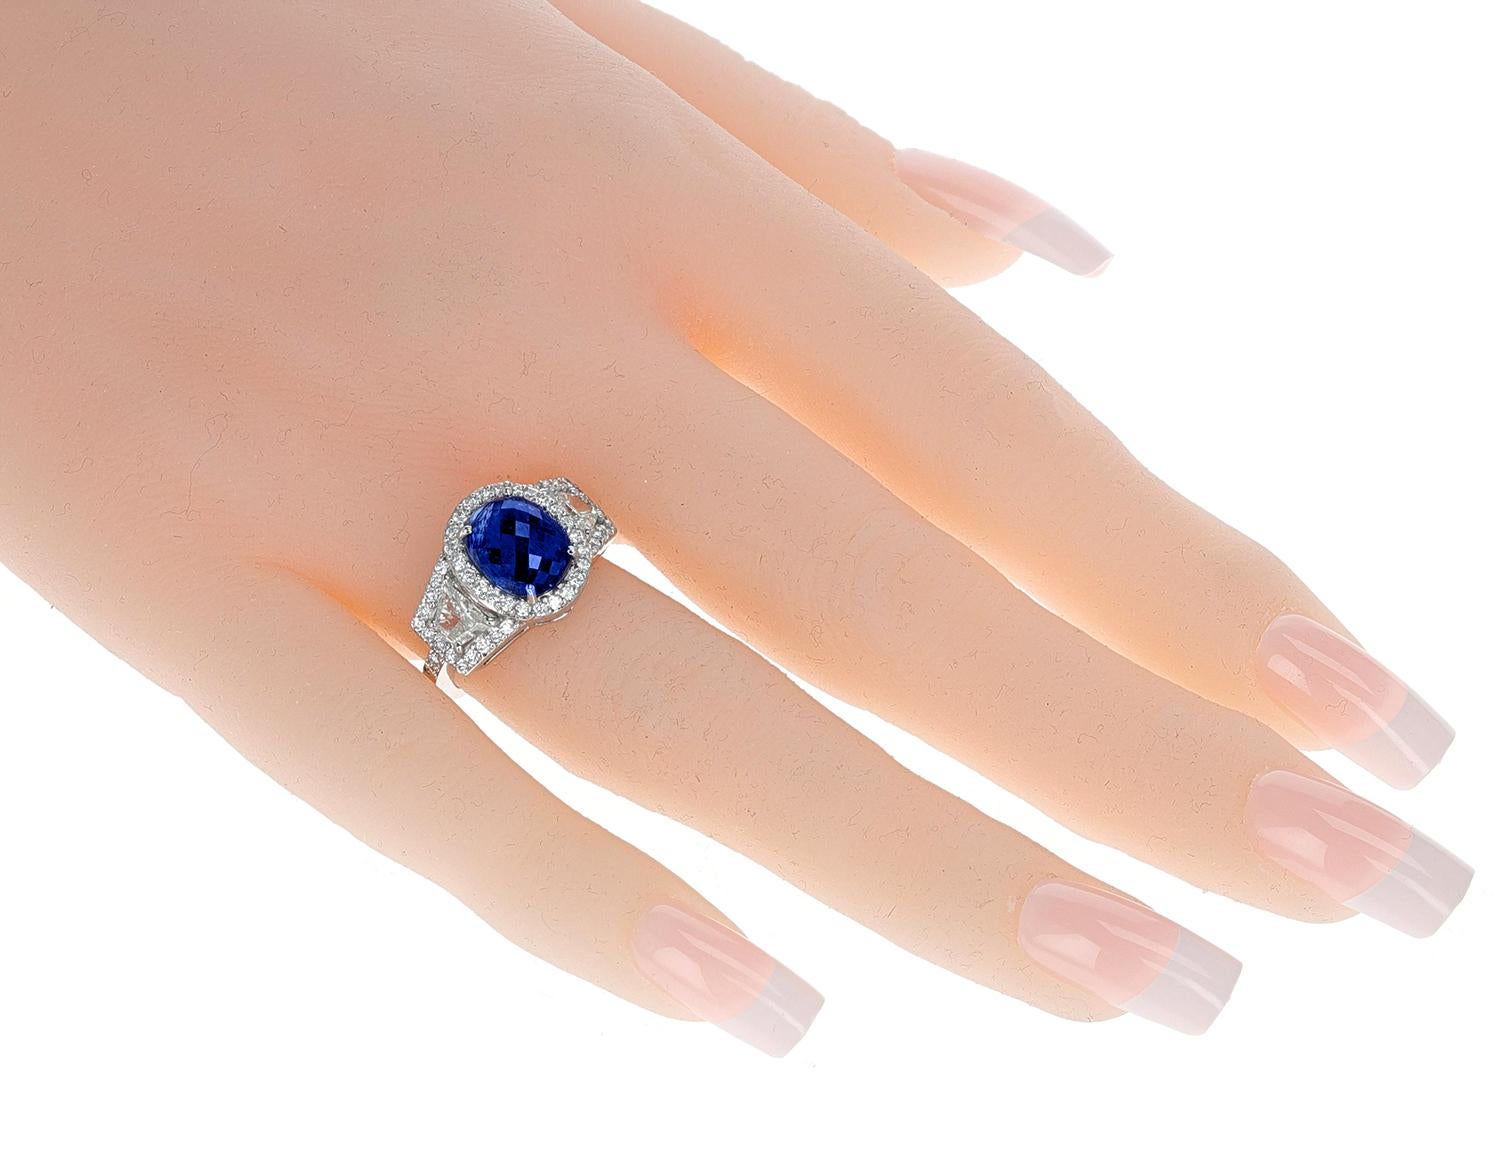 4.64 Ct. Unheated Sapphire Ring with Diamonds, Platinum In Excellent Condition For Sale In New York, NY